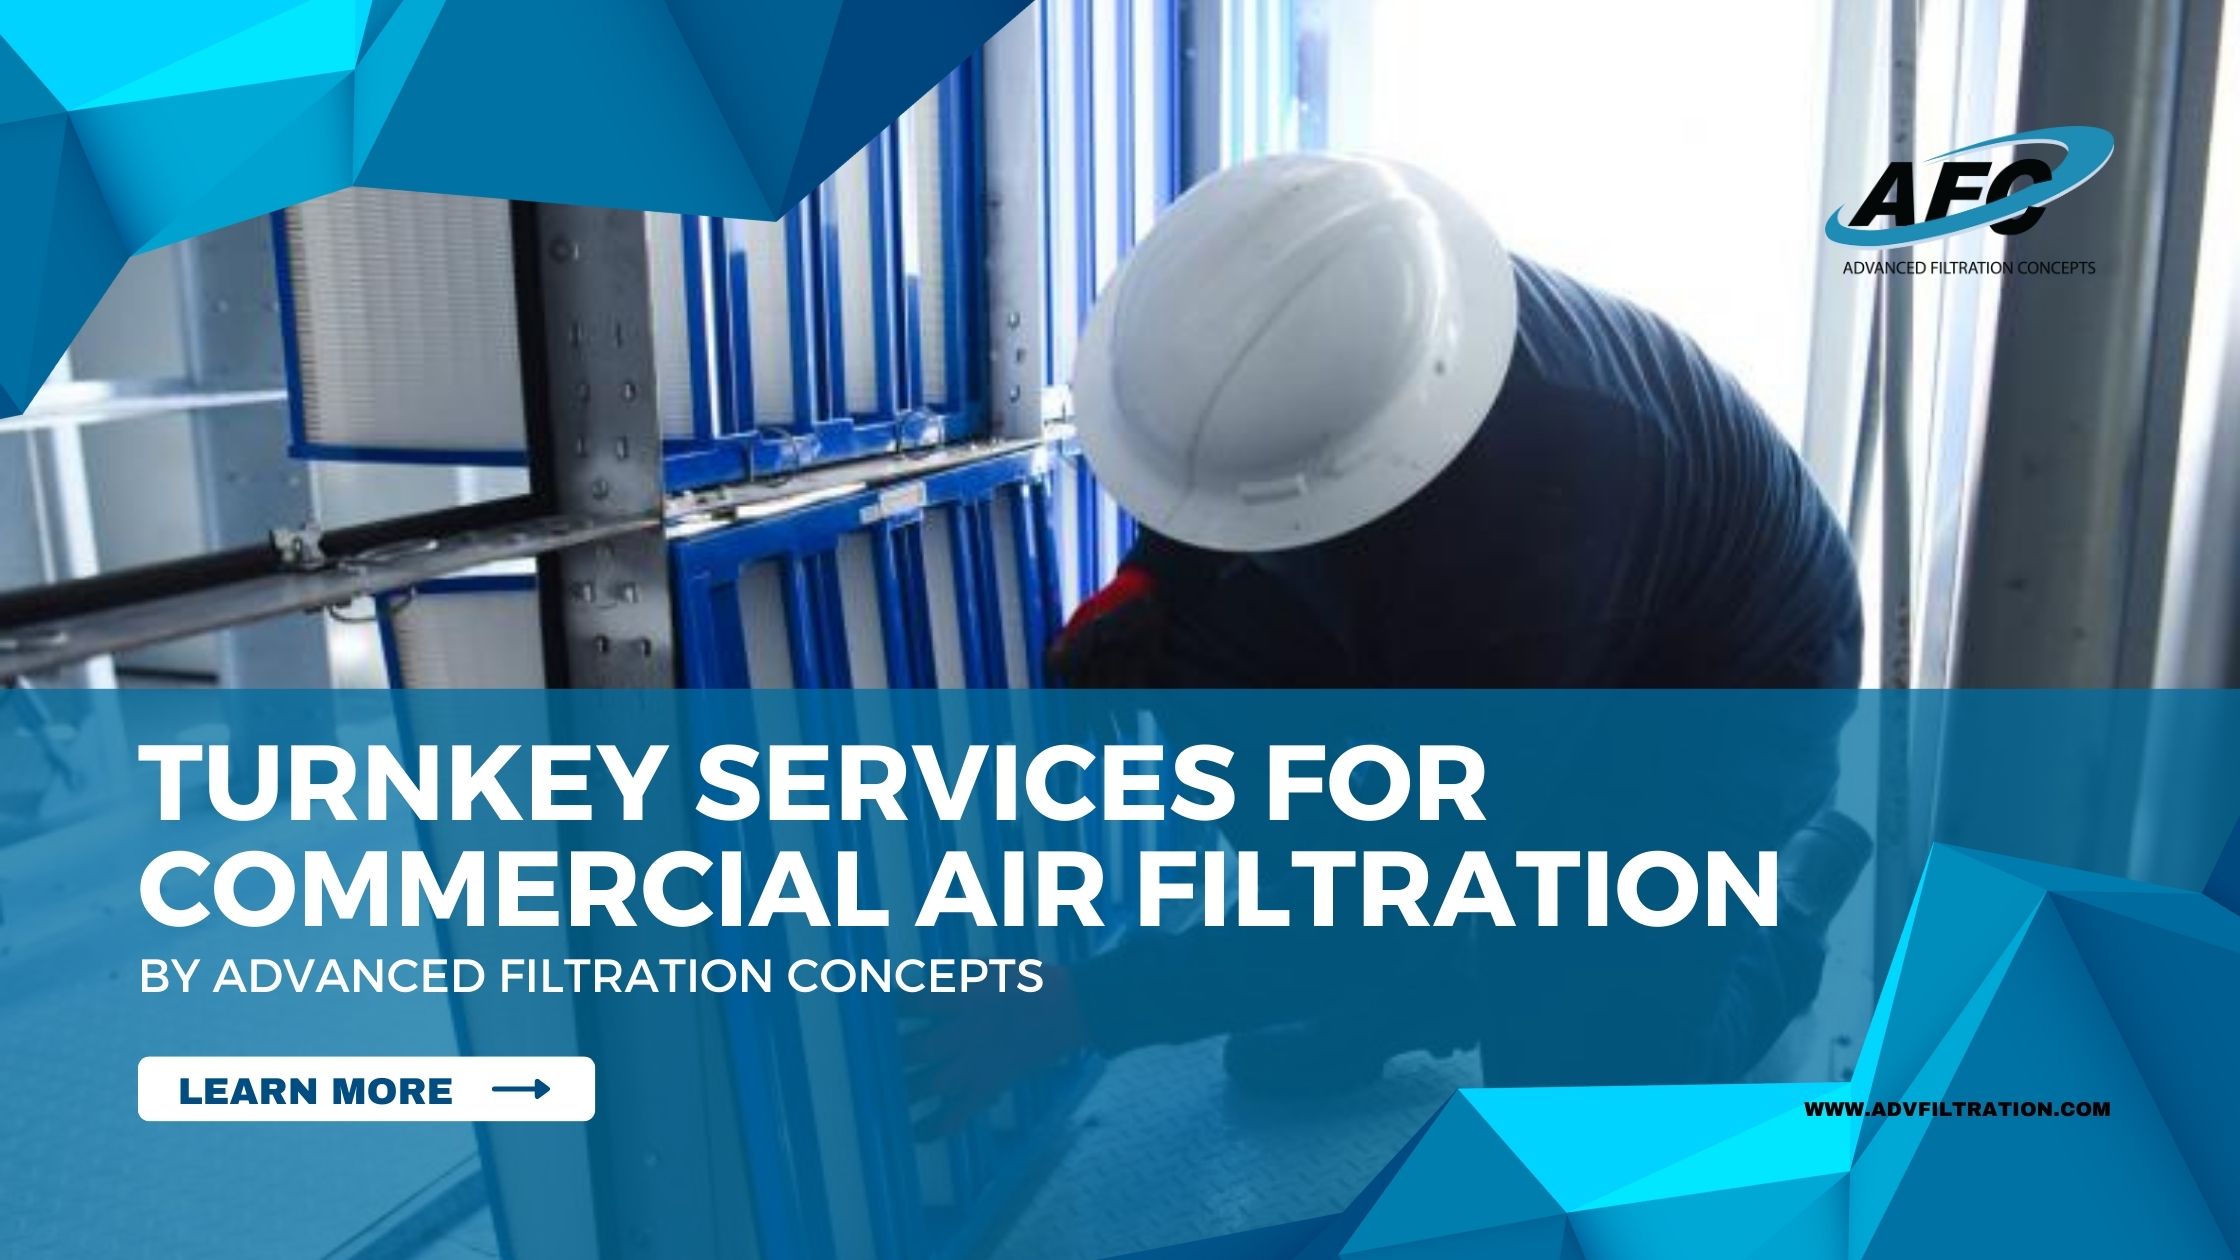 Turnkey Services for Commercial Air Filtration - Advanced